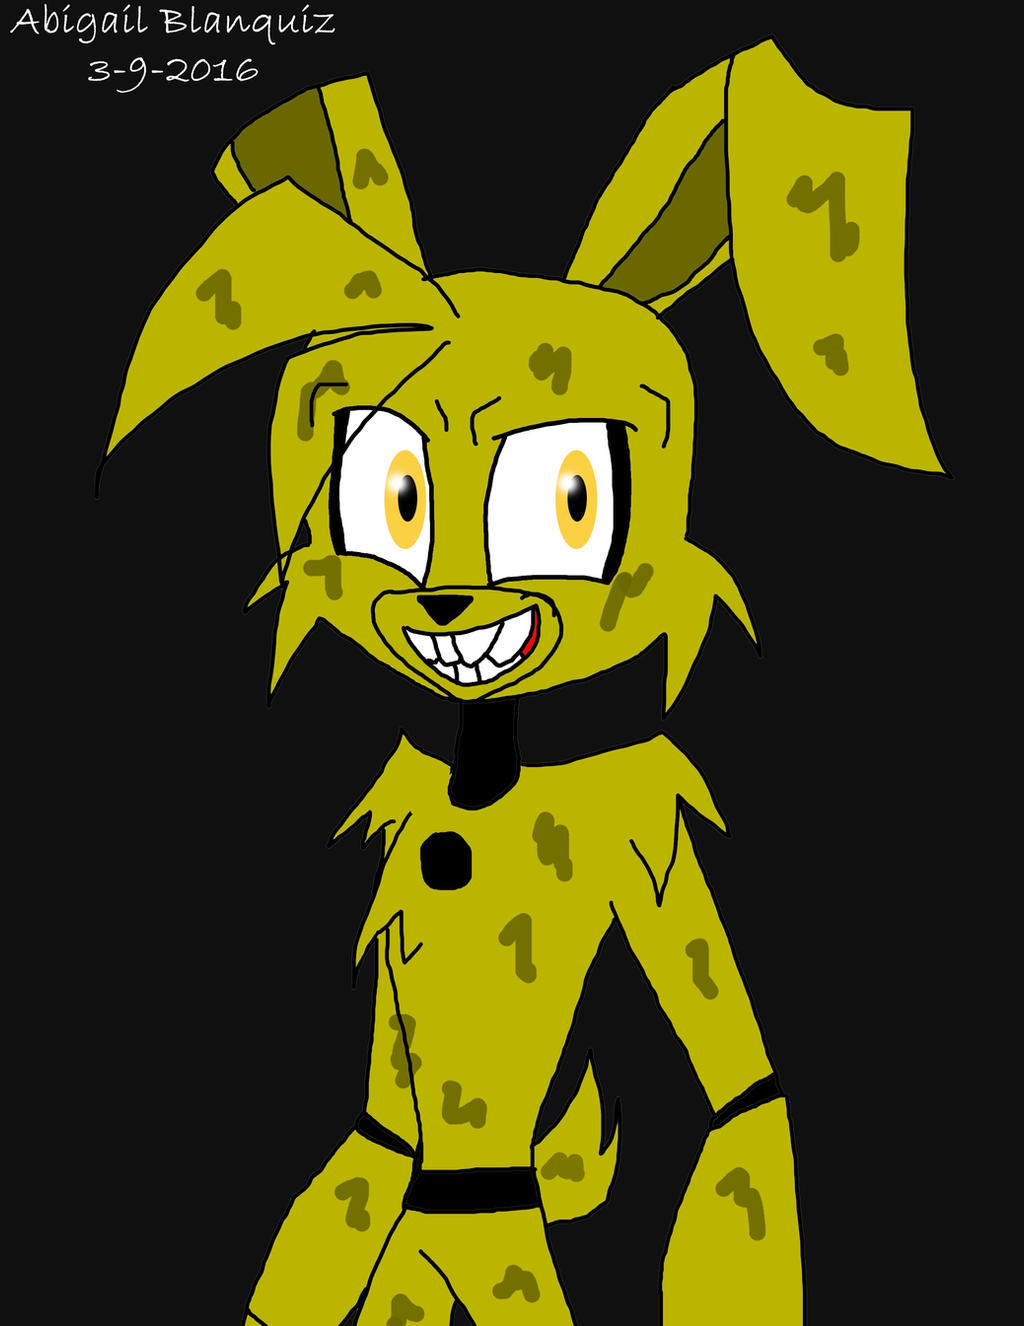 Rip your heart out \ Springtrap by Margaret008 on DeviantArt